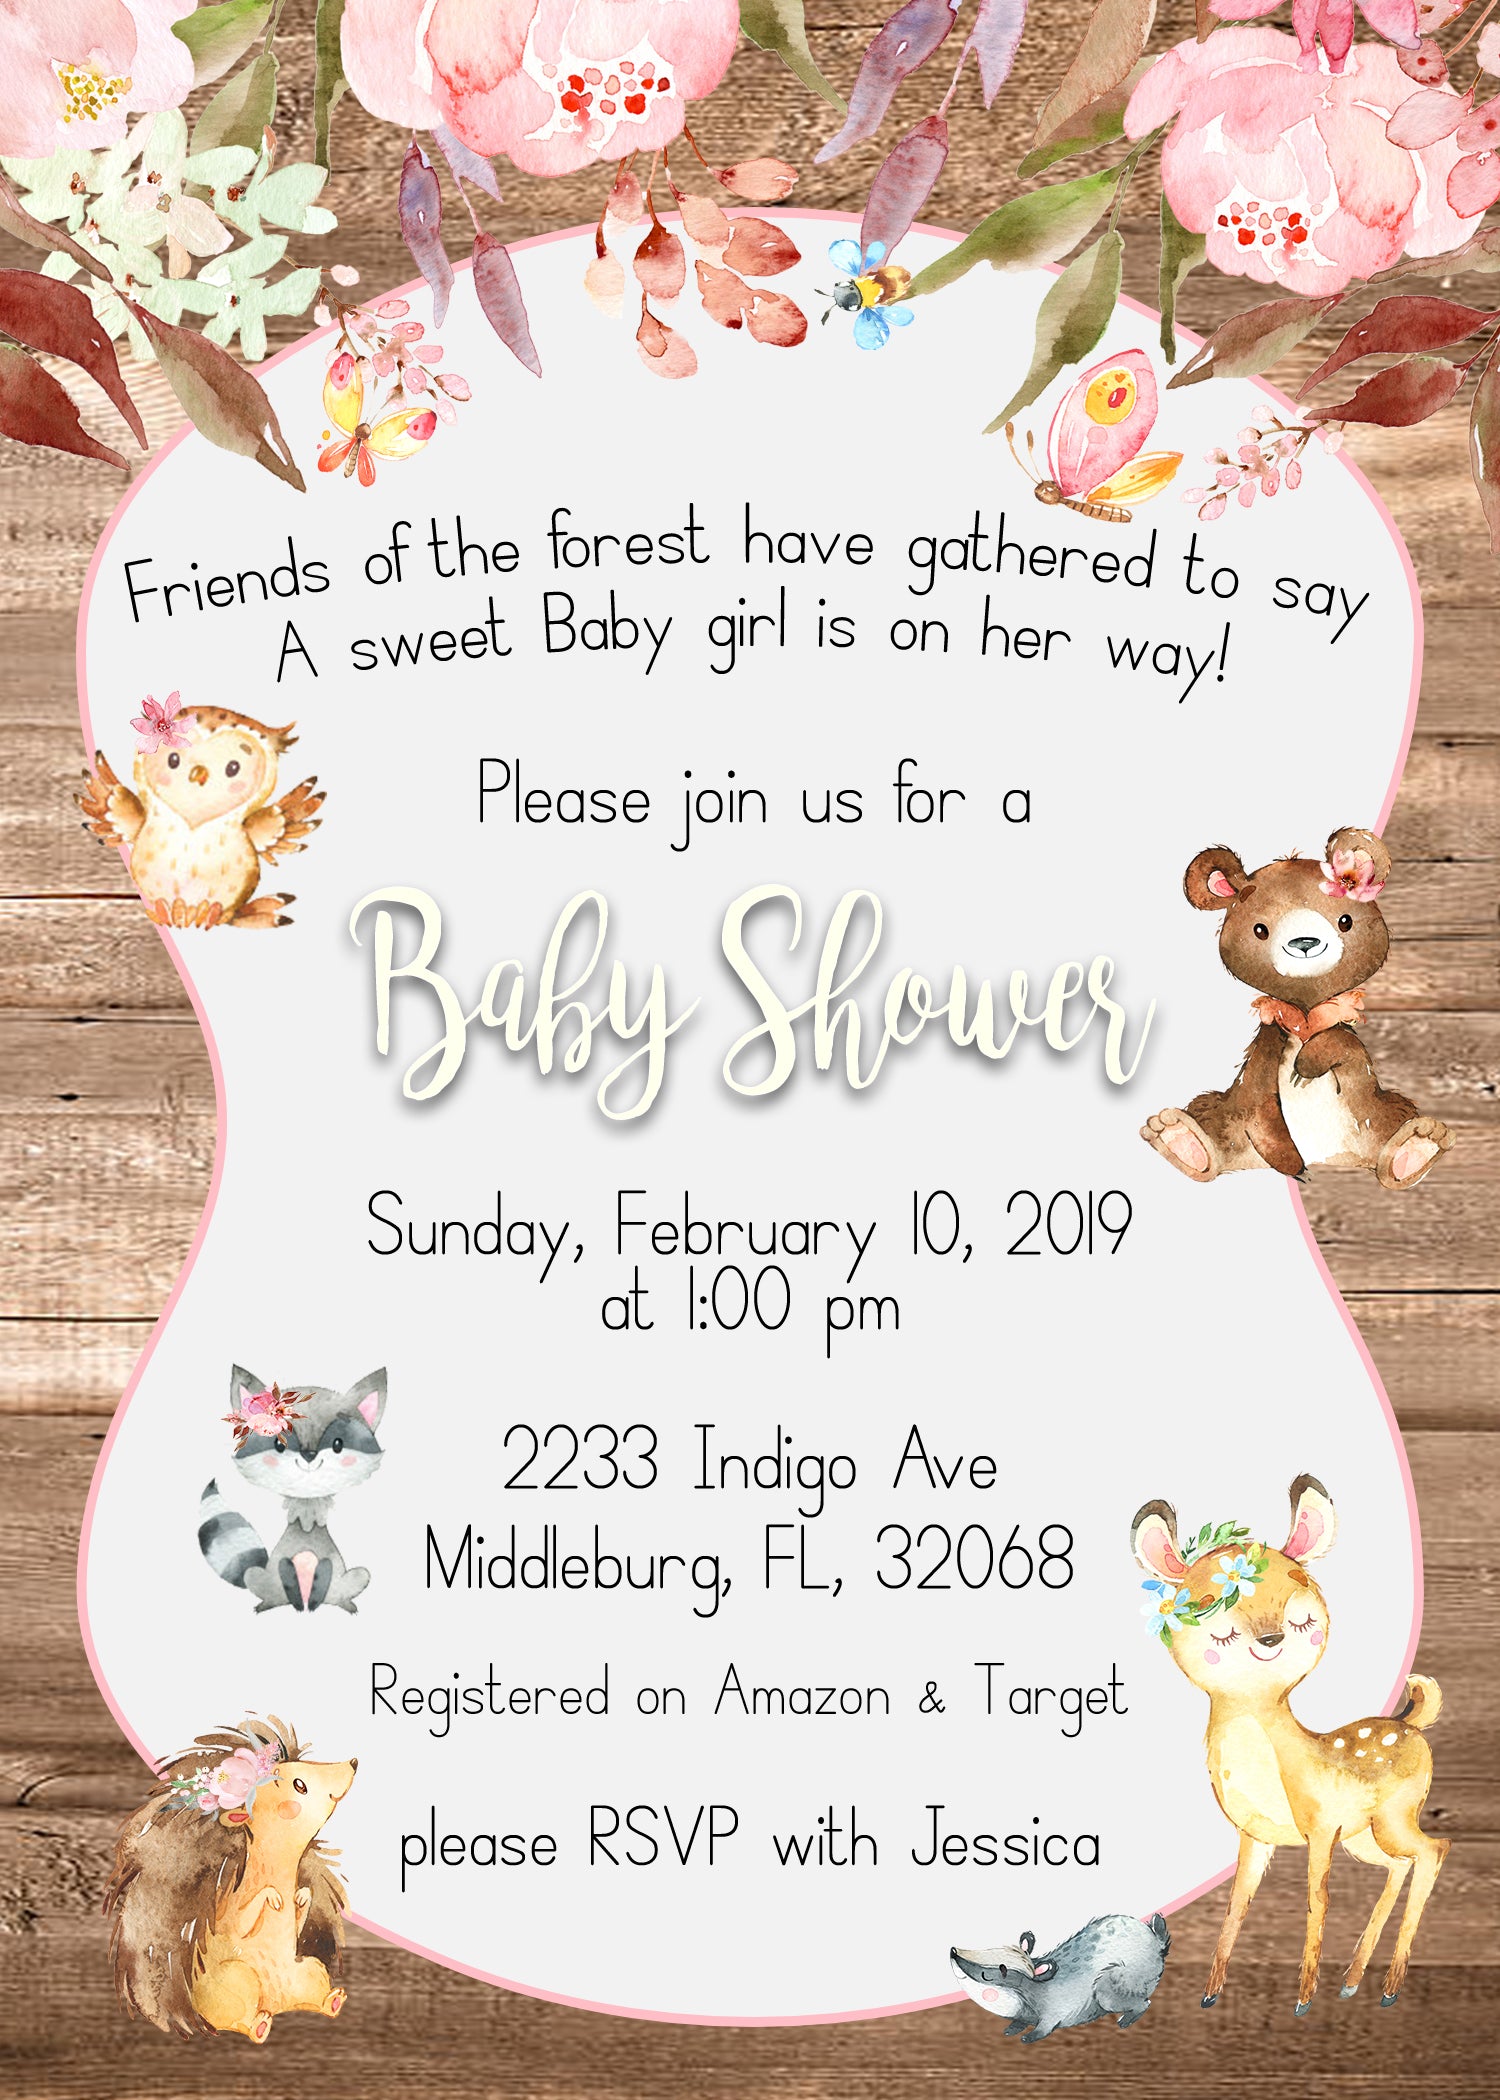 Woodland Forest Enchanted Baby Shower Invitations - BSE101 - Invitetique